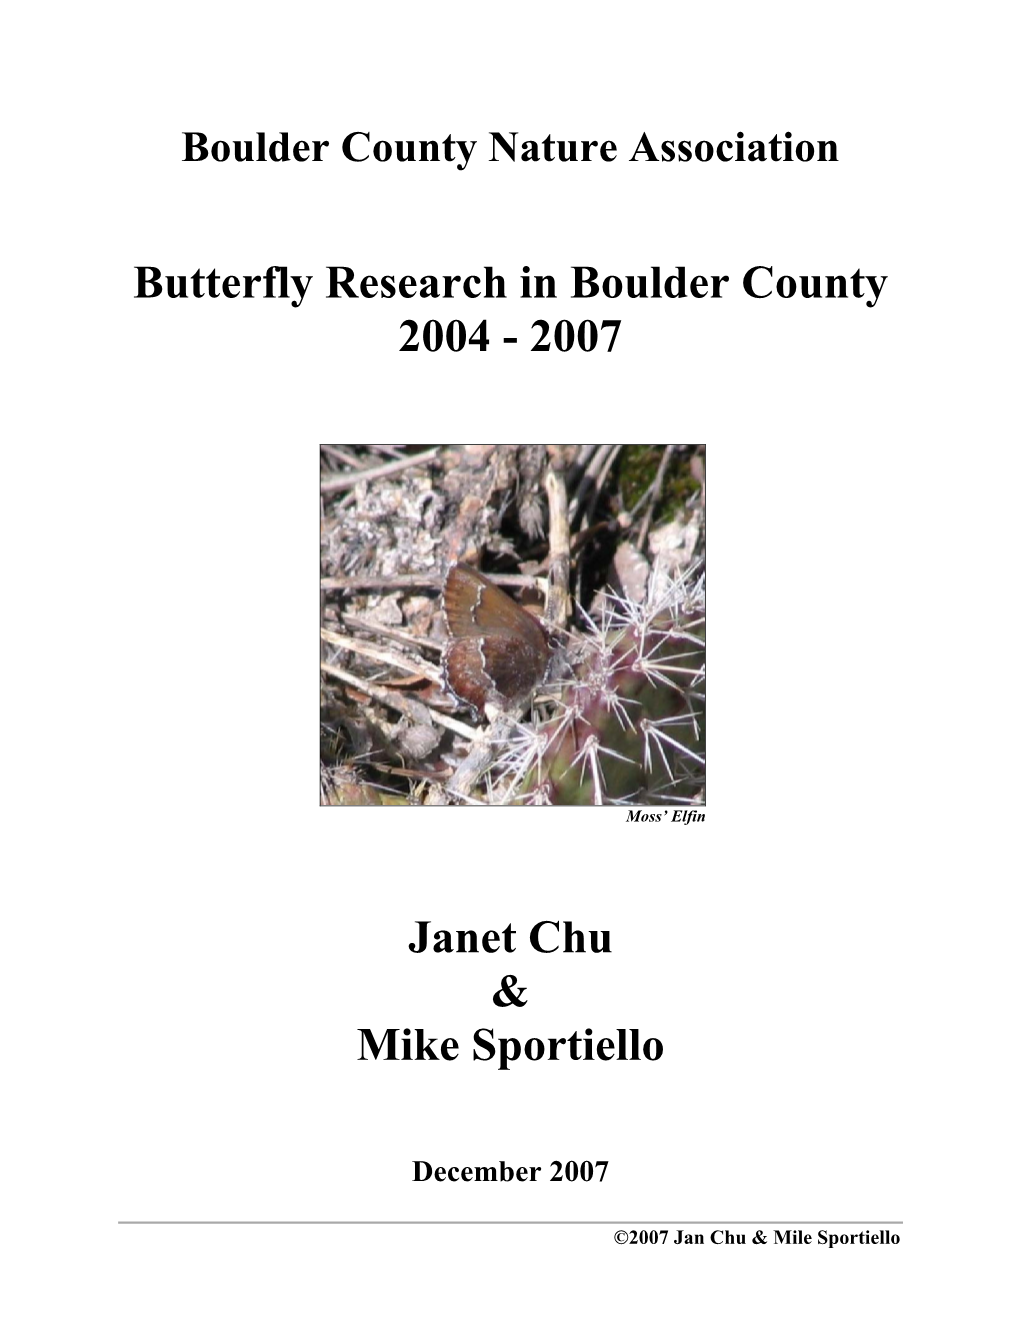 Butterfly Research in Boulder County 2004 - 2007